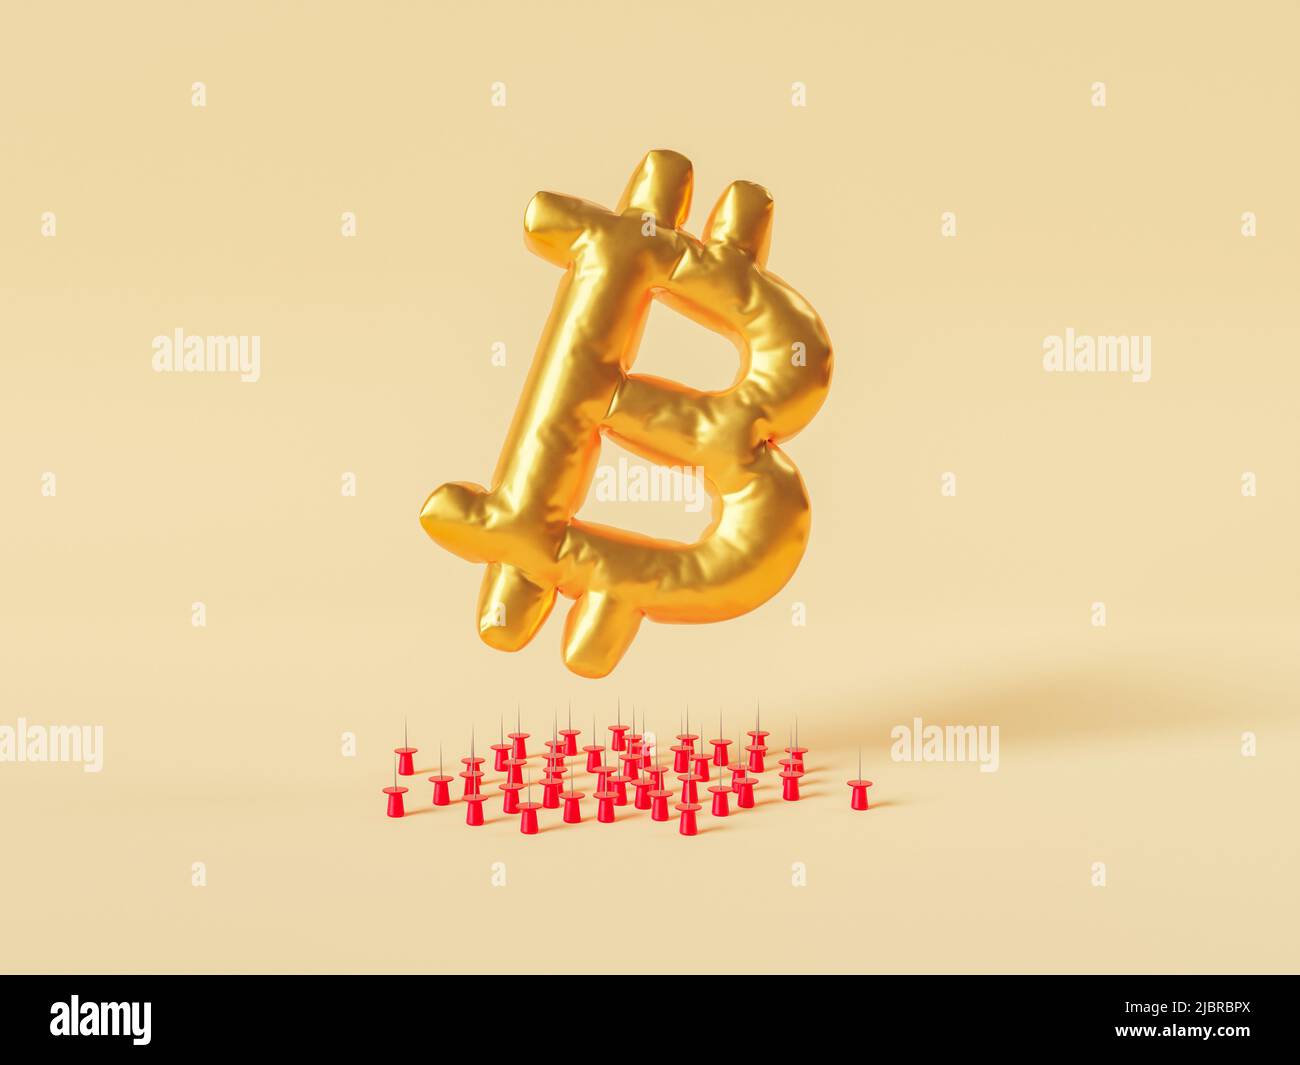 3D rendering of golden bitcoin shaped balloon flying over many sharp pins and avoiding failure against beige background Stock Photo